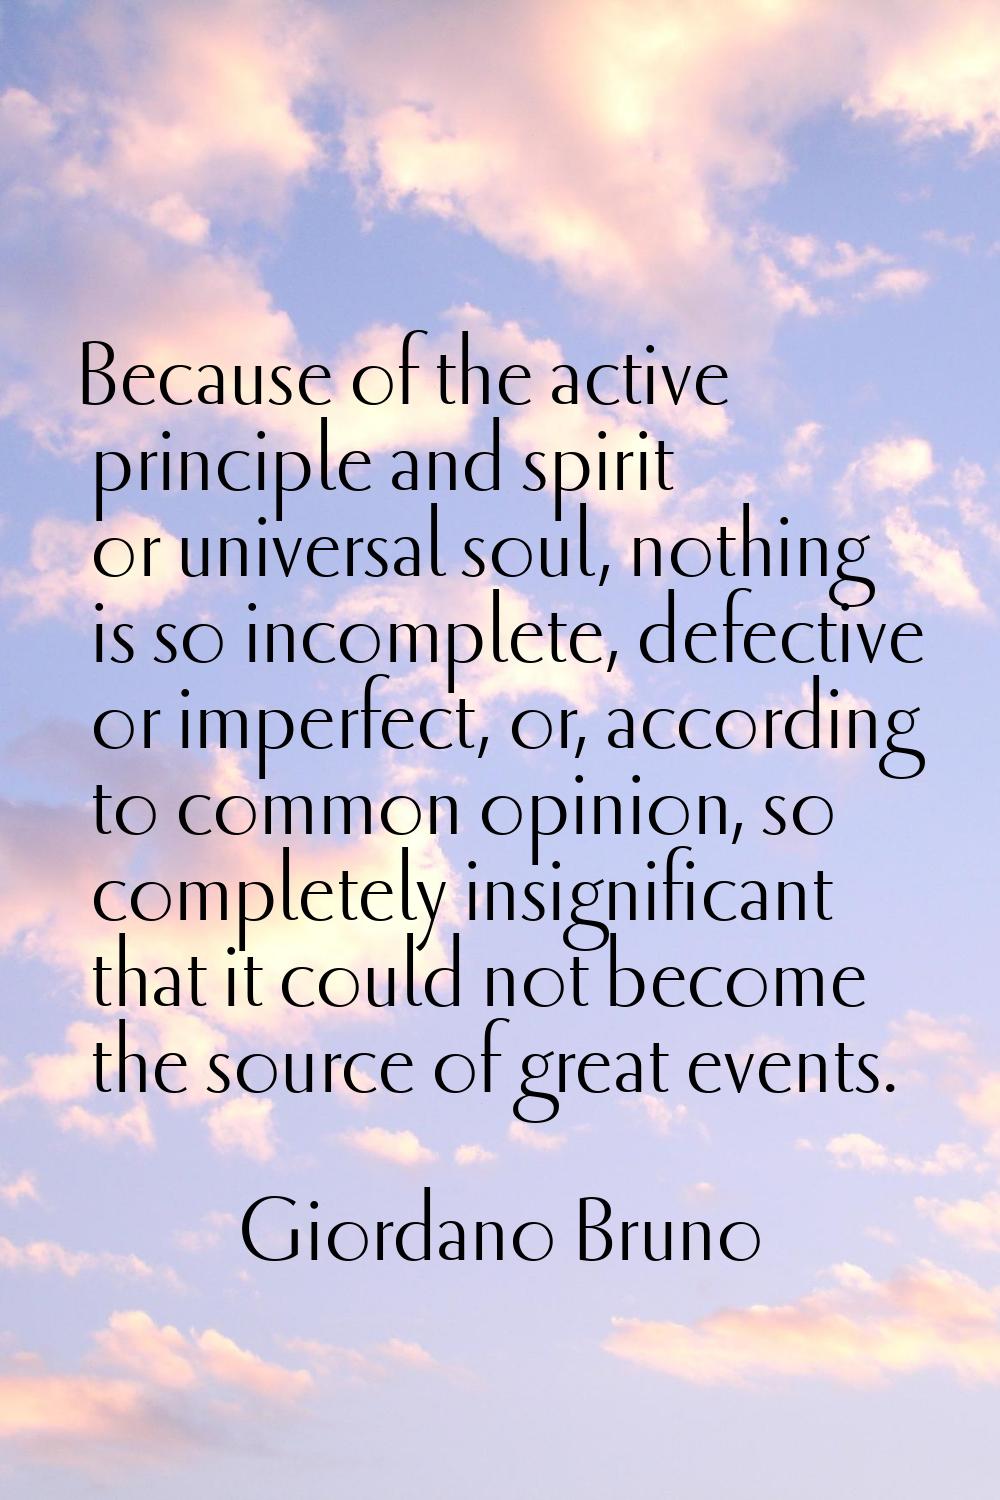 Because of the active principle and spirit or universal soul, nothing is so incomplete, defective o